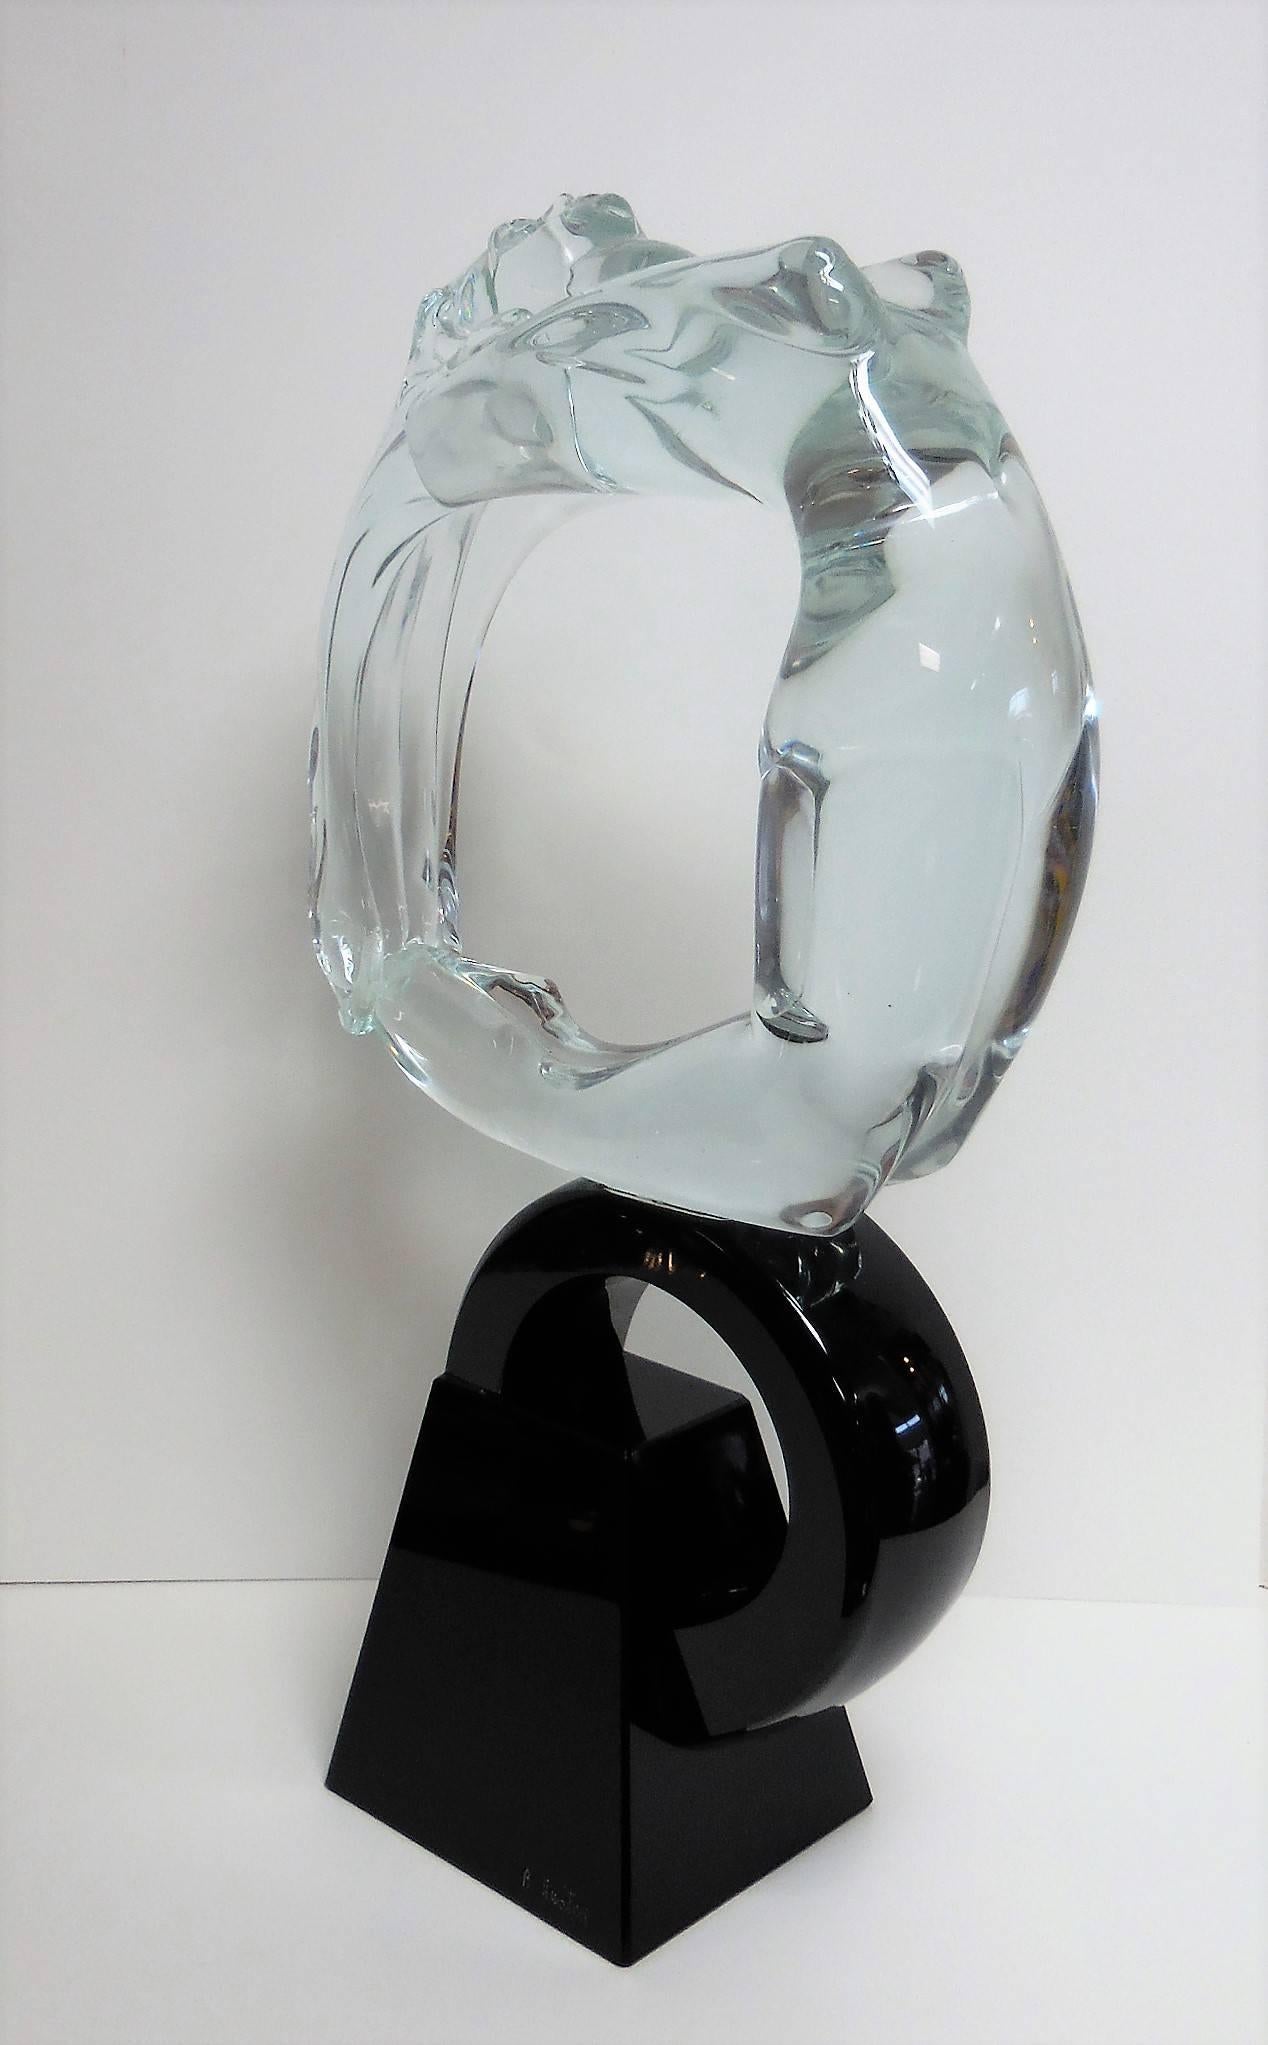 A large Art Deco style glass sculpture by Renato Anatra. A solid nude rests on a solid black glass base.